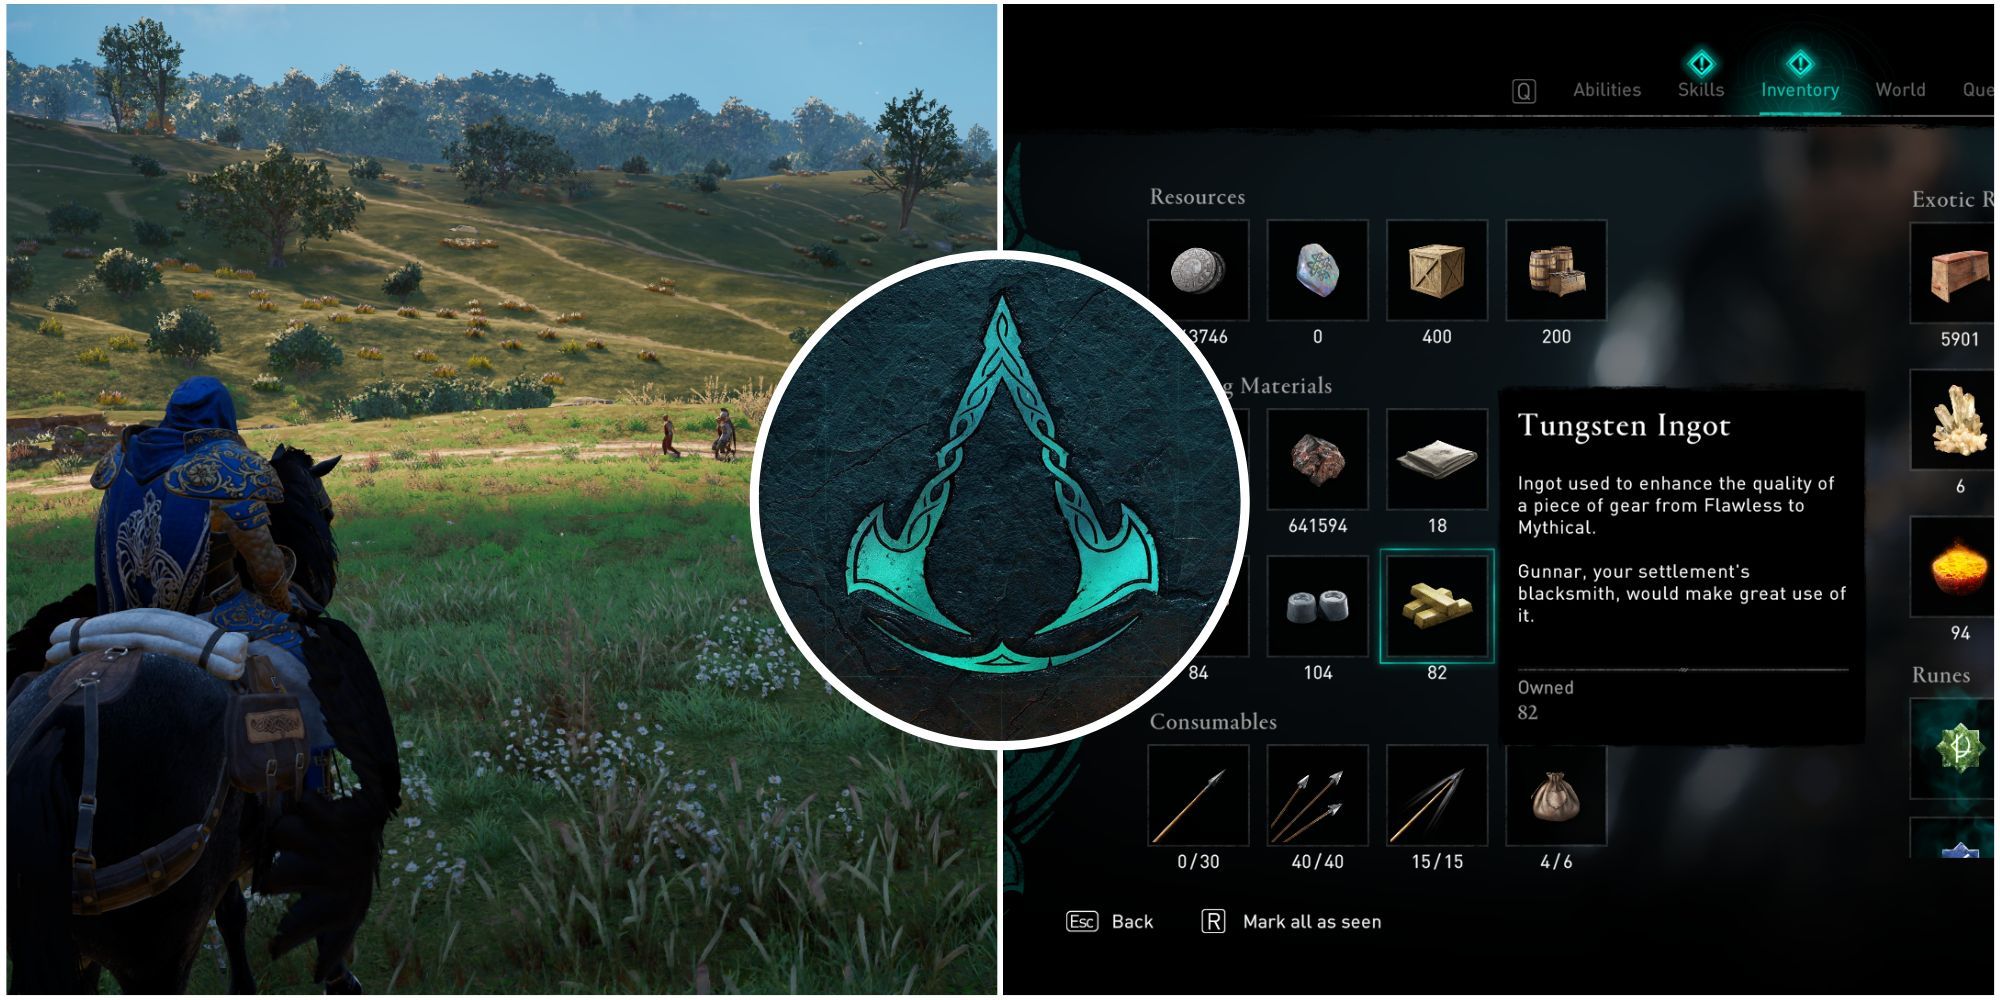 Featured image for Assassin's Creed Valhalla showcasing Eivor and Inventory